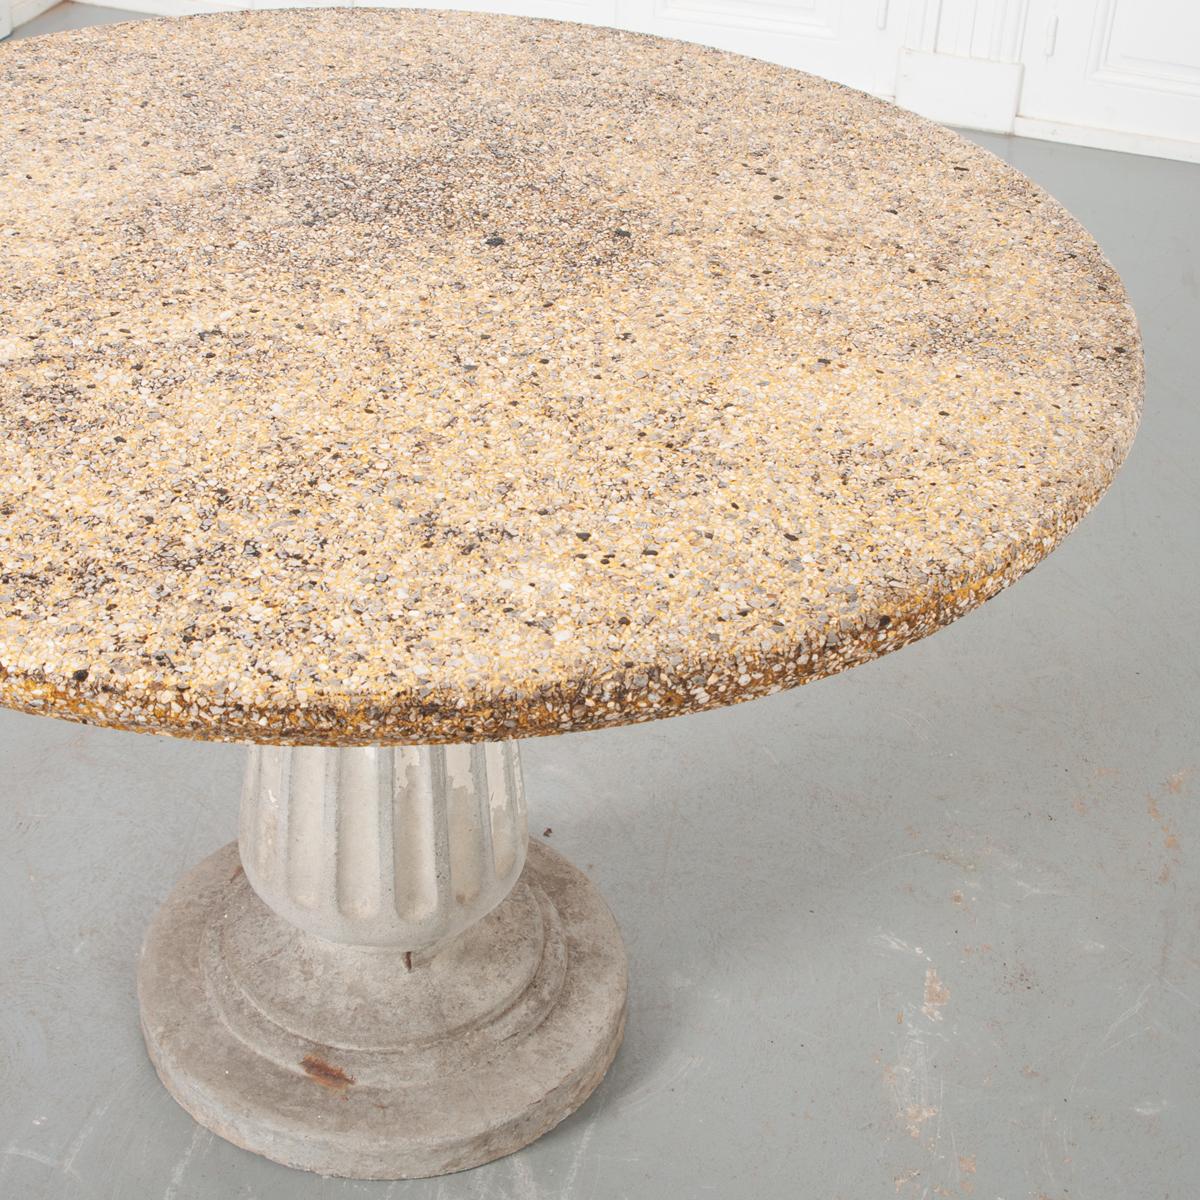 This is a lovely vintage European garden table. It has a pedestal base which has been cast with reconstituted stone. The round top has been cast in reconstituted stone with more small pebbles in its design. It would be a very attractive table for